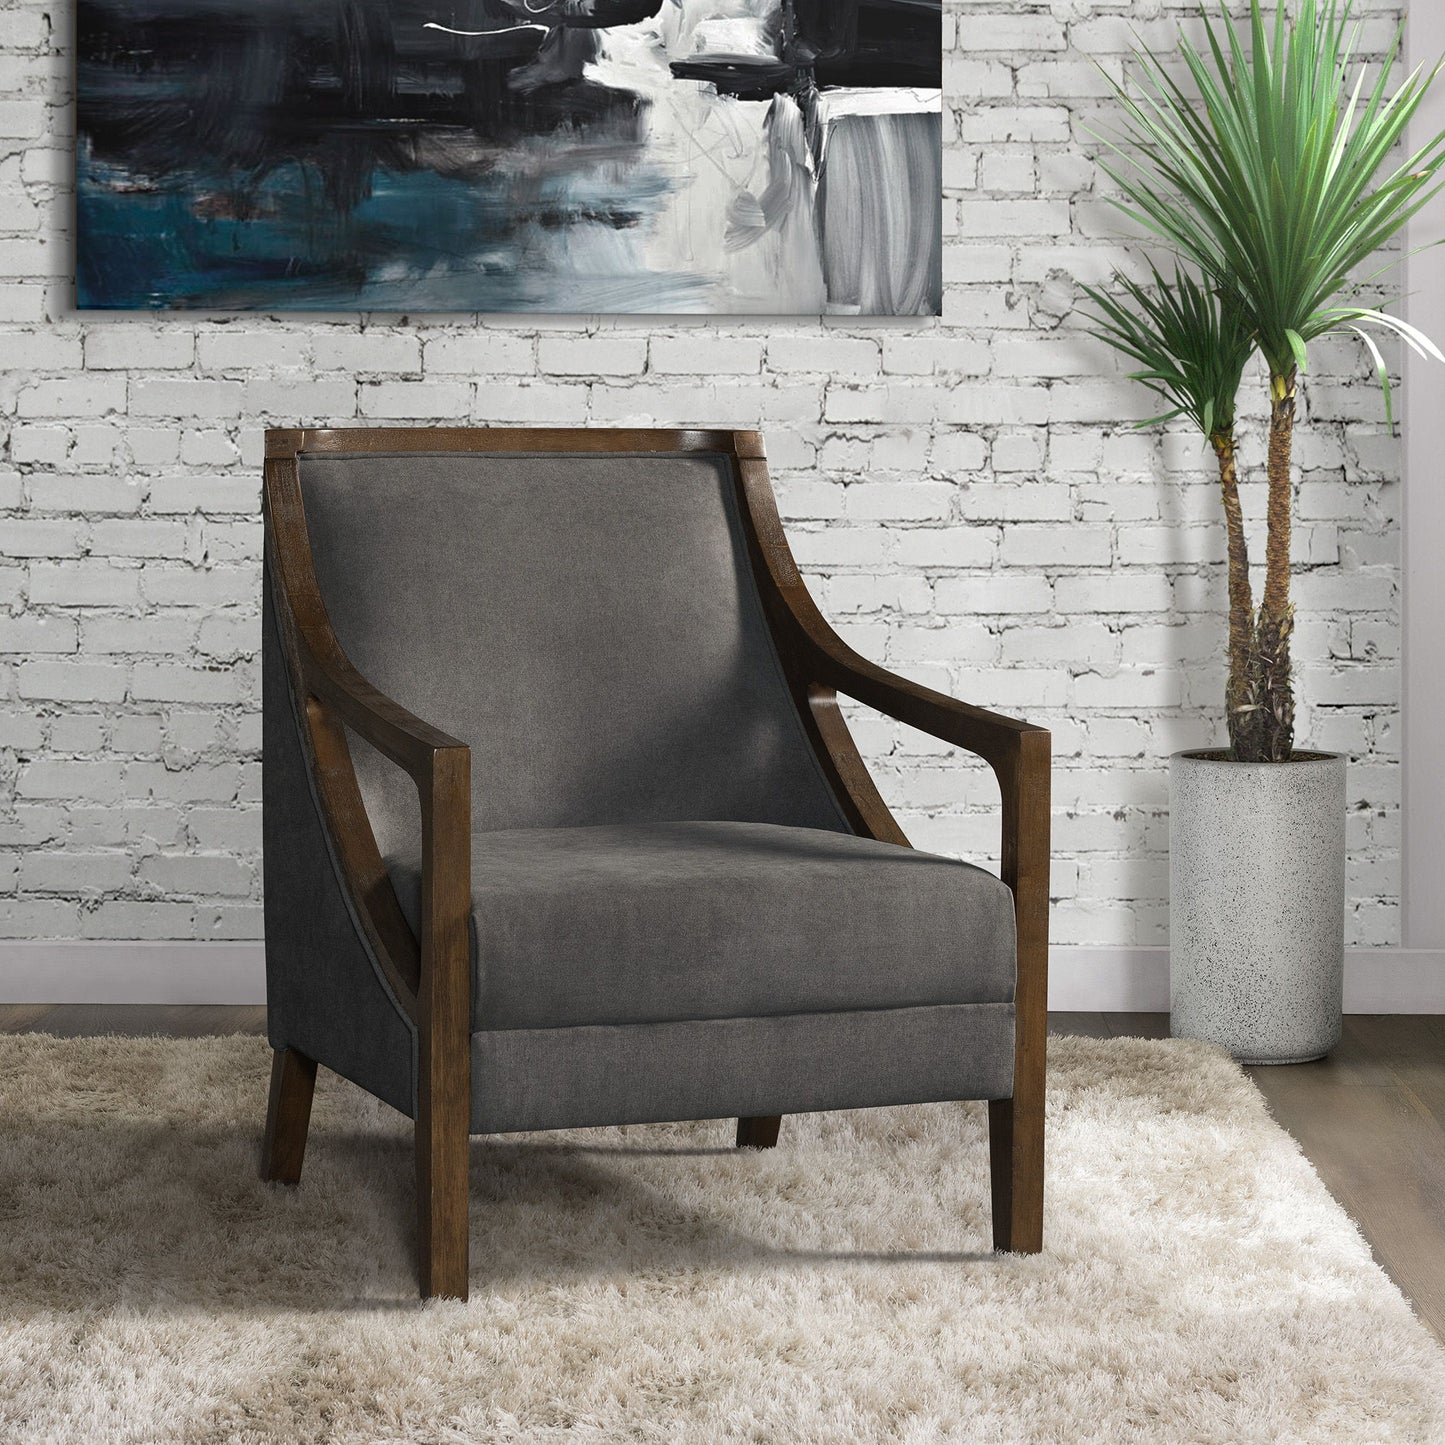 Hopkins - Accent Chair With Brown Frame